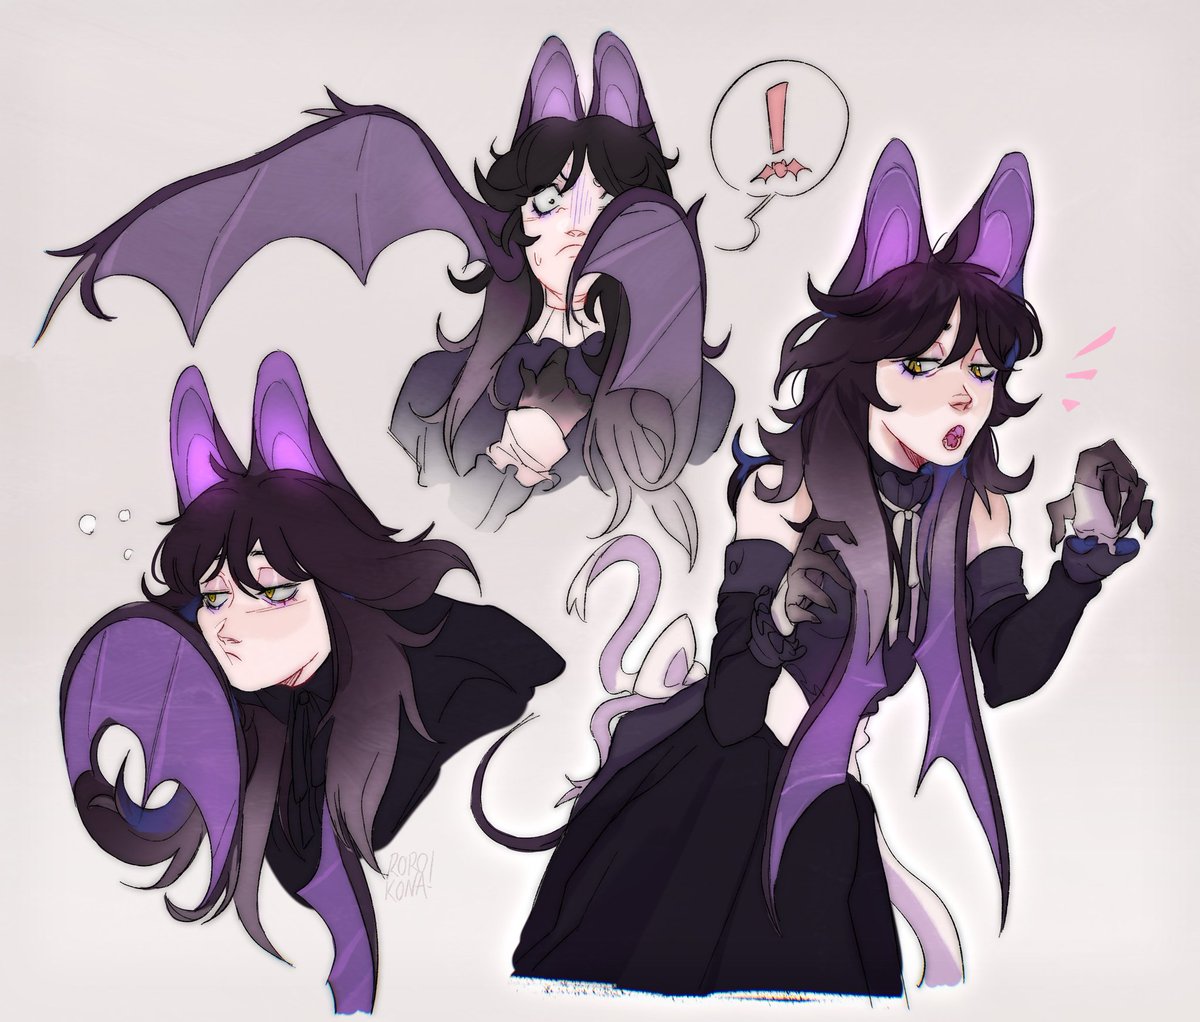 「she is bat now#oc 」|Roro 🦇のイラスト